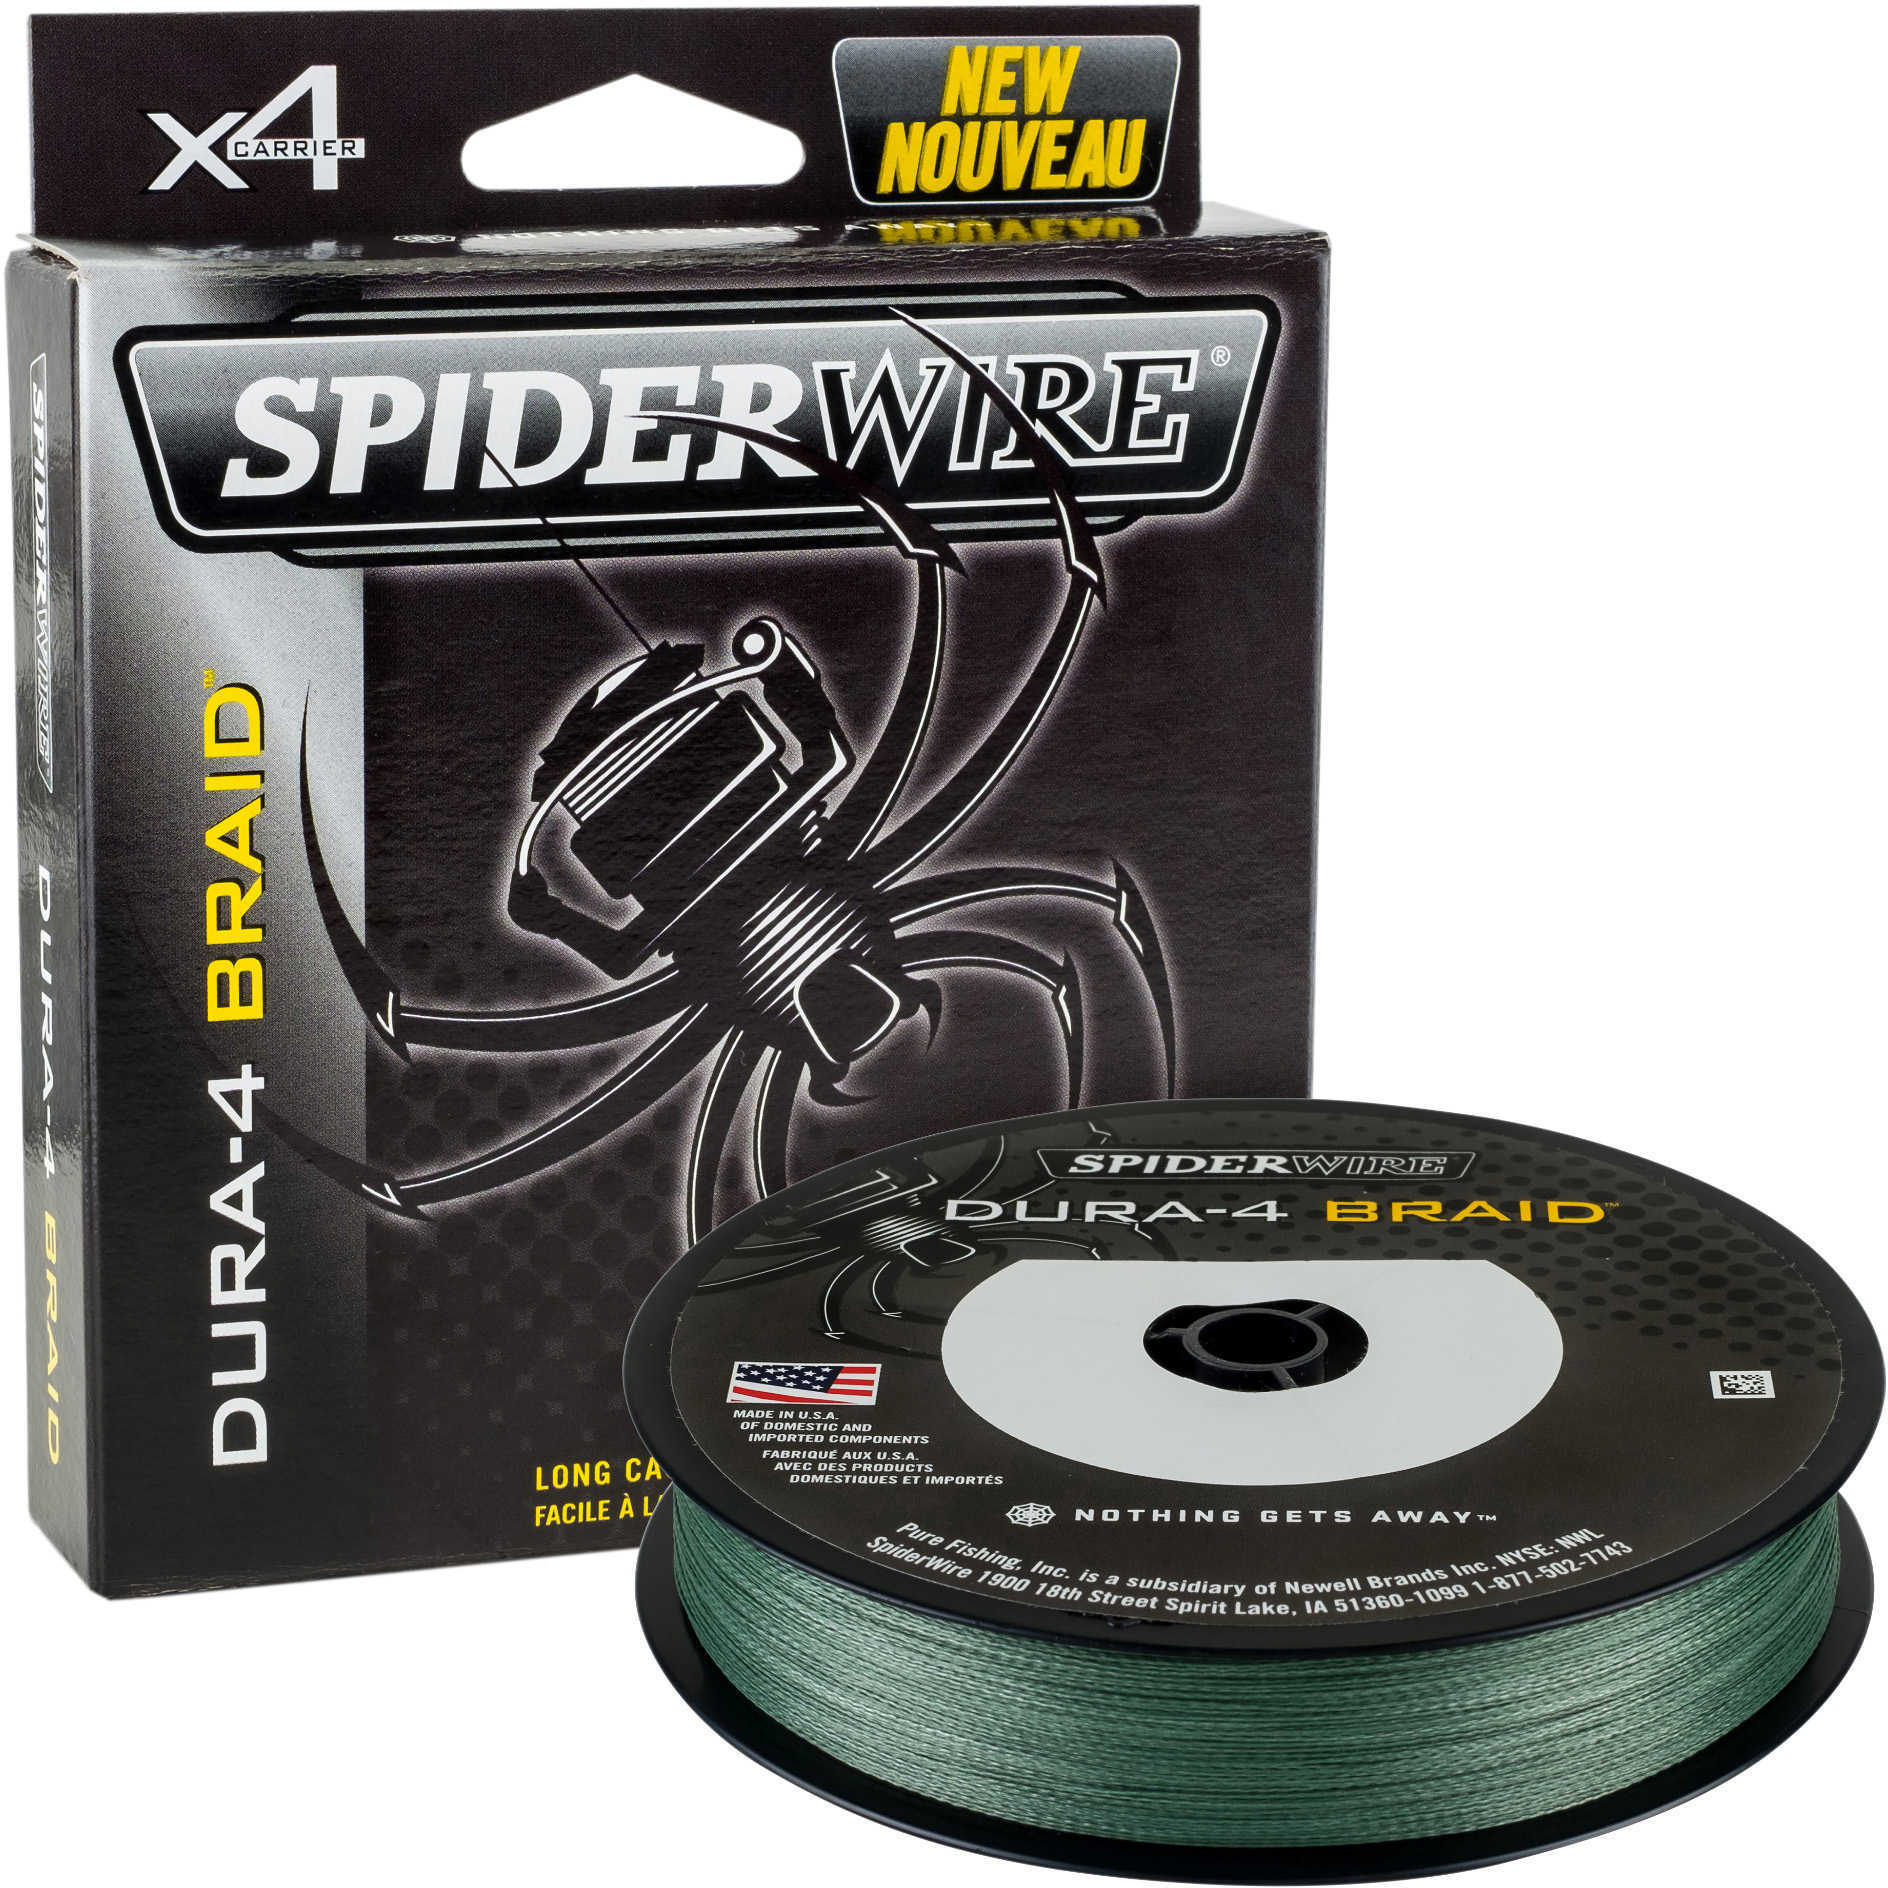 Spiderwire Dura-4 Braided Line 200 Yards , 80 lbs Tested, 0.016" Diameter, Moss Green